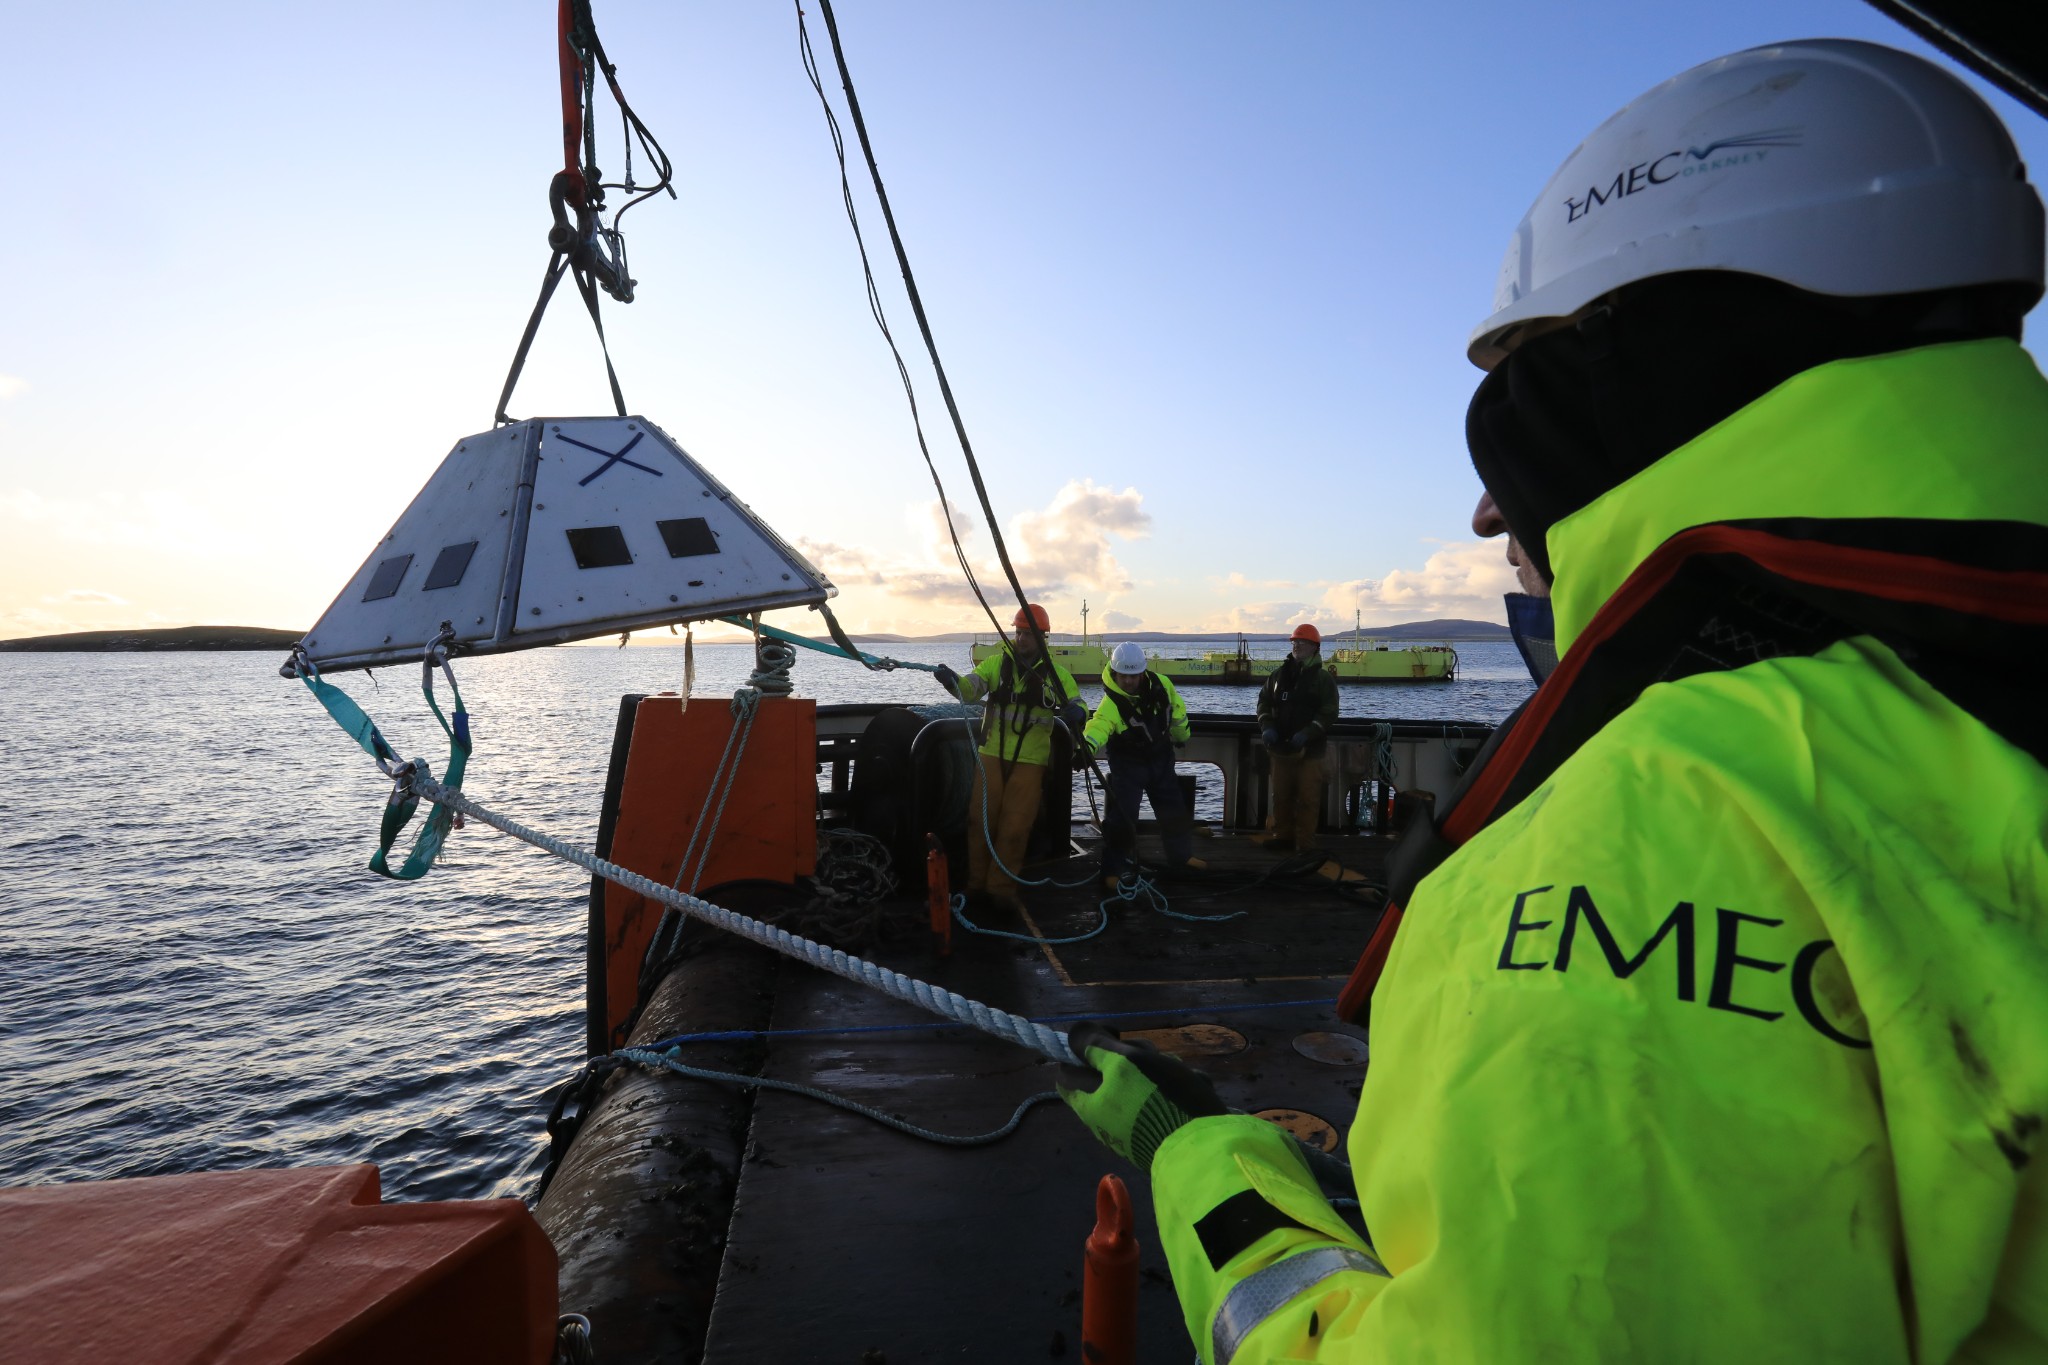 Device deployment at EMEC, Orkney - image by Colin Keldie